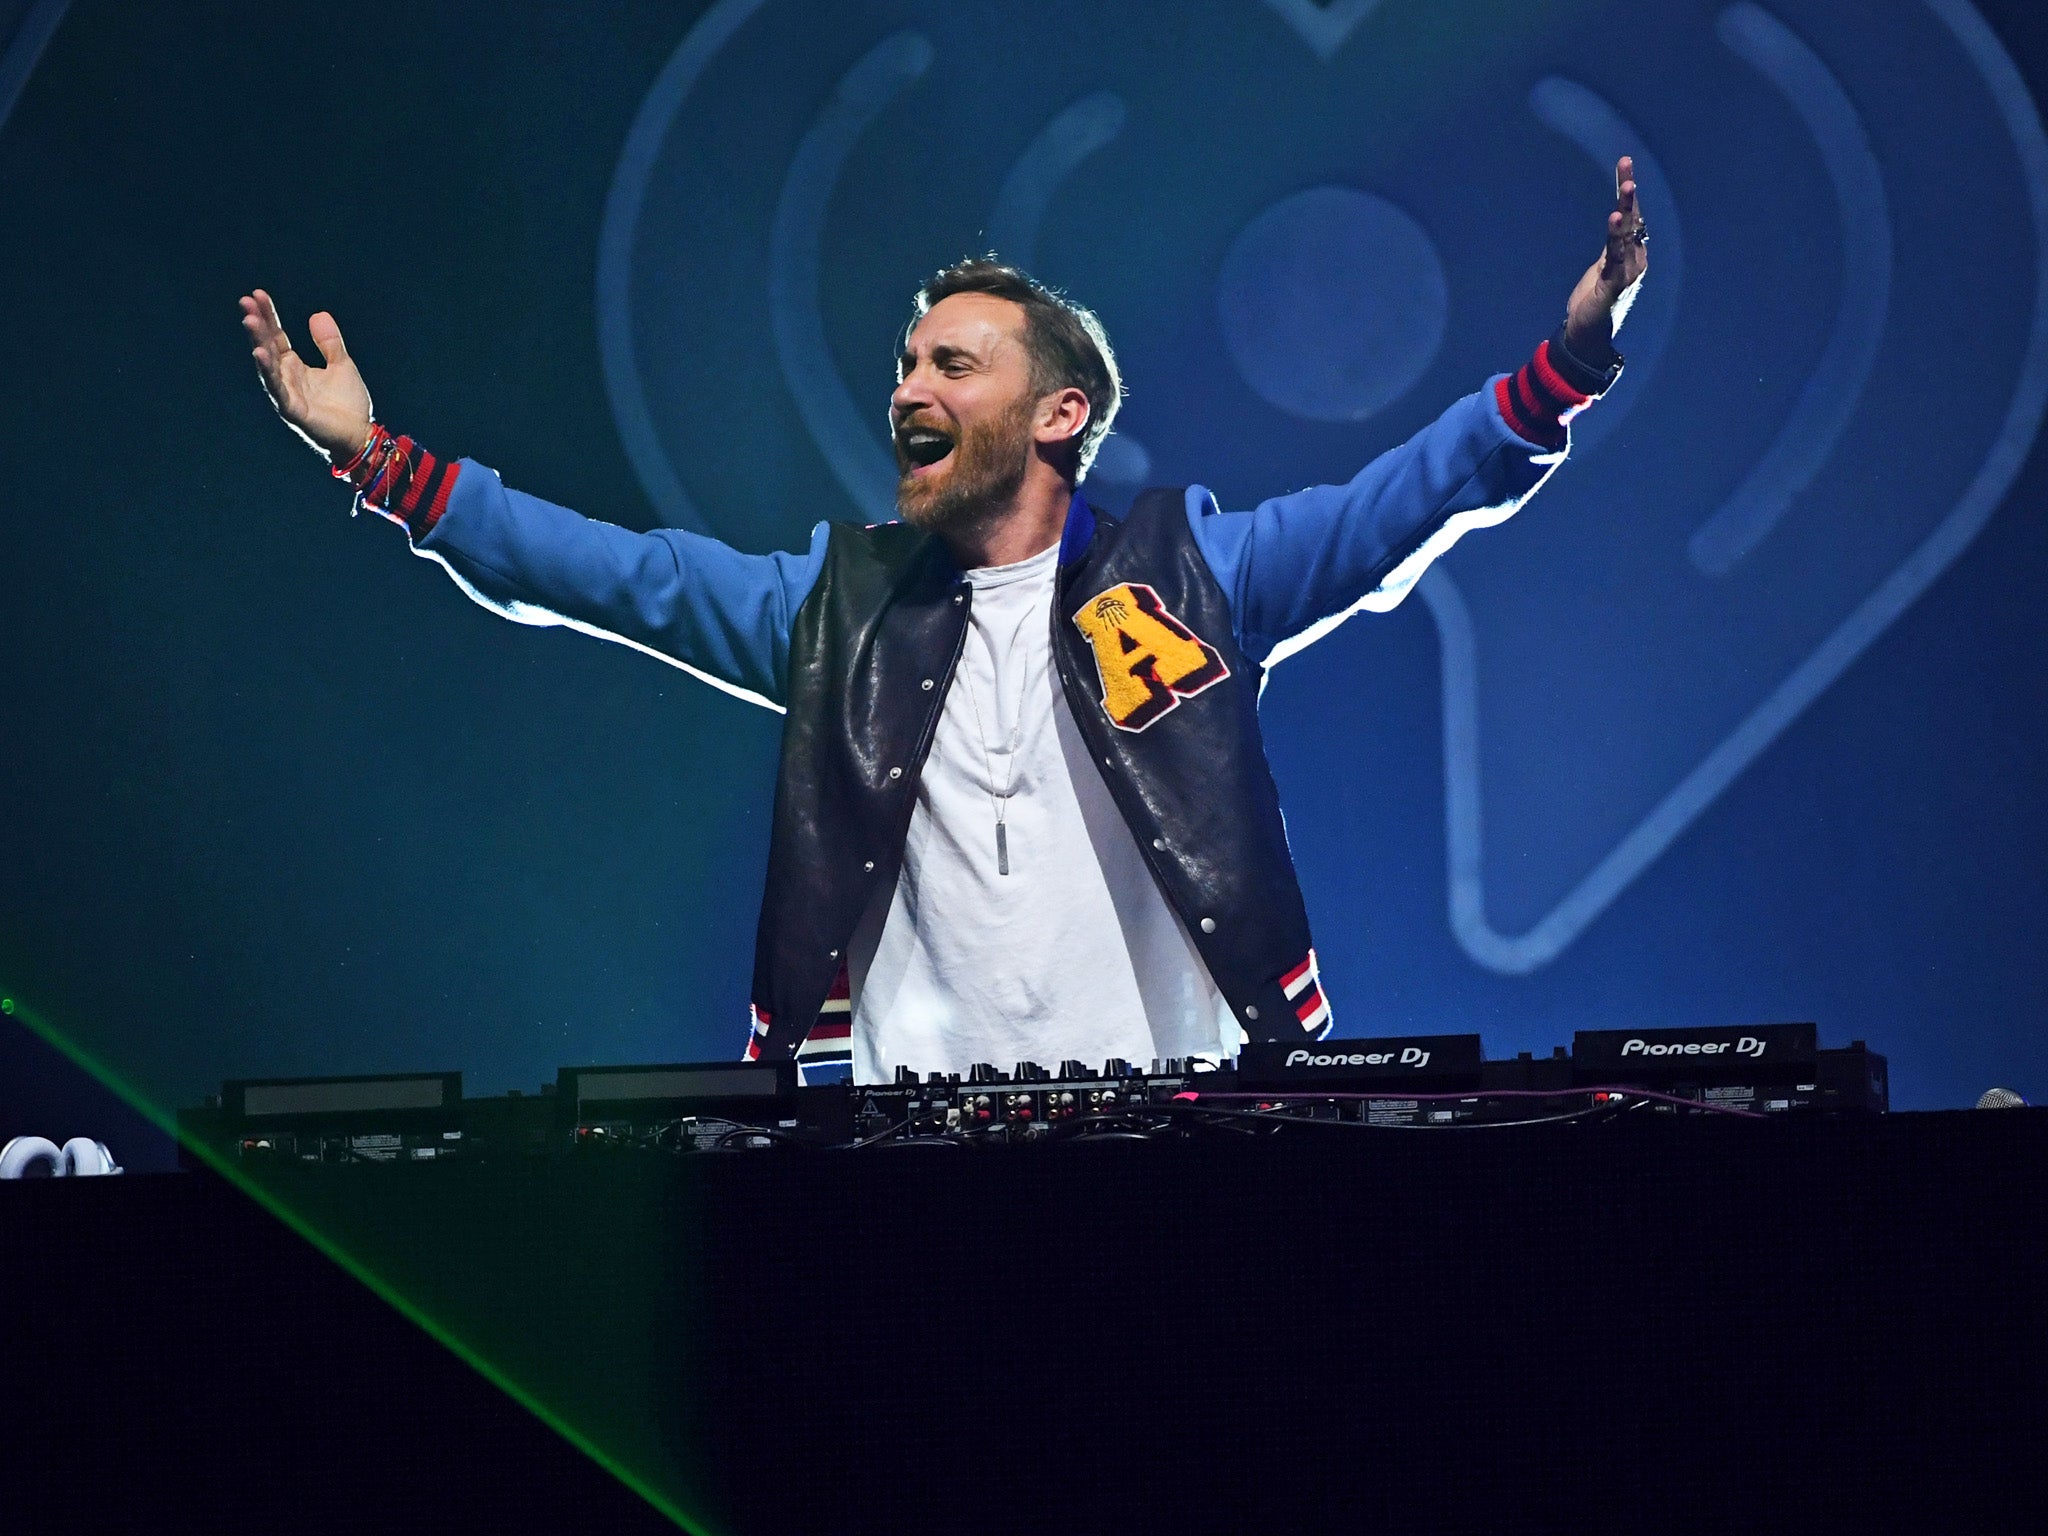 David Guetta performs onstage during the iHeartRadio Music Festival in Las Vegas